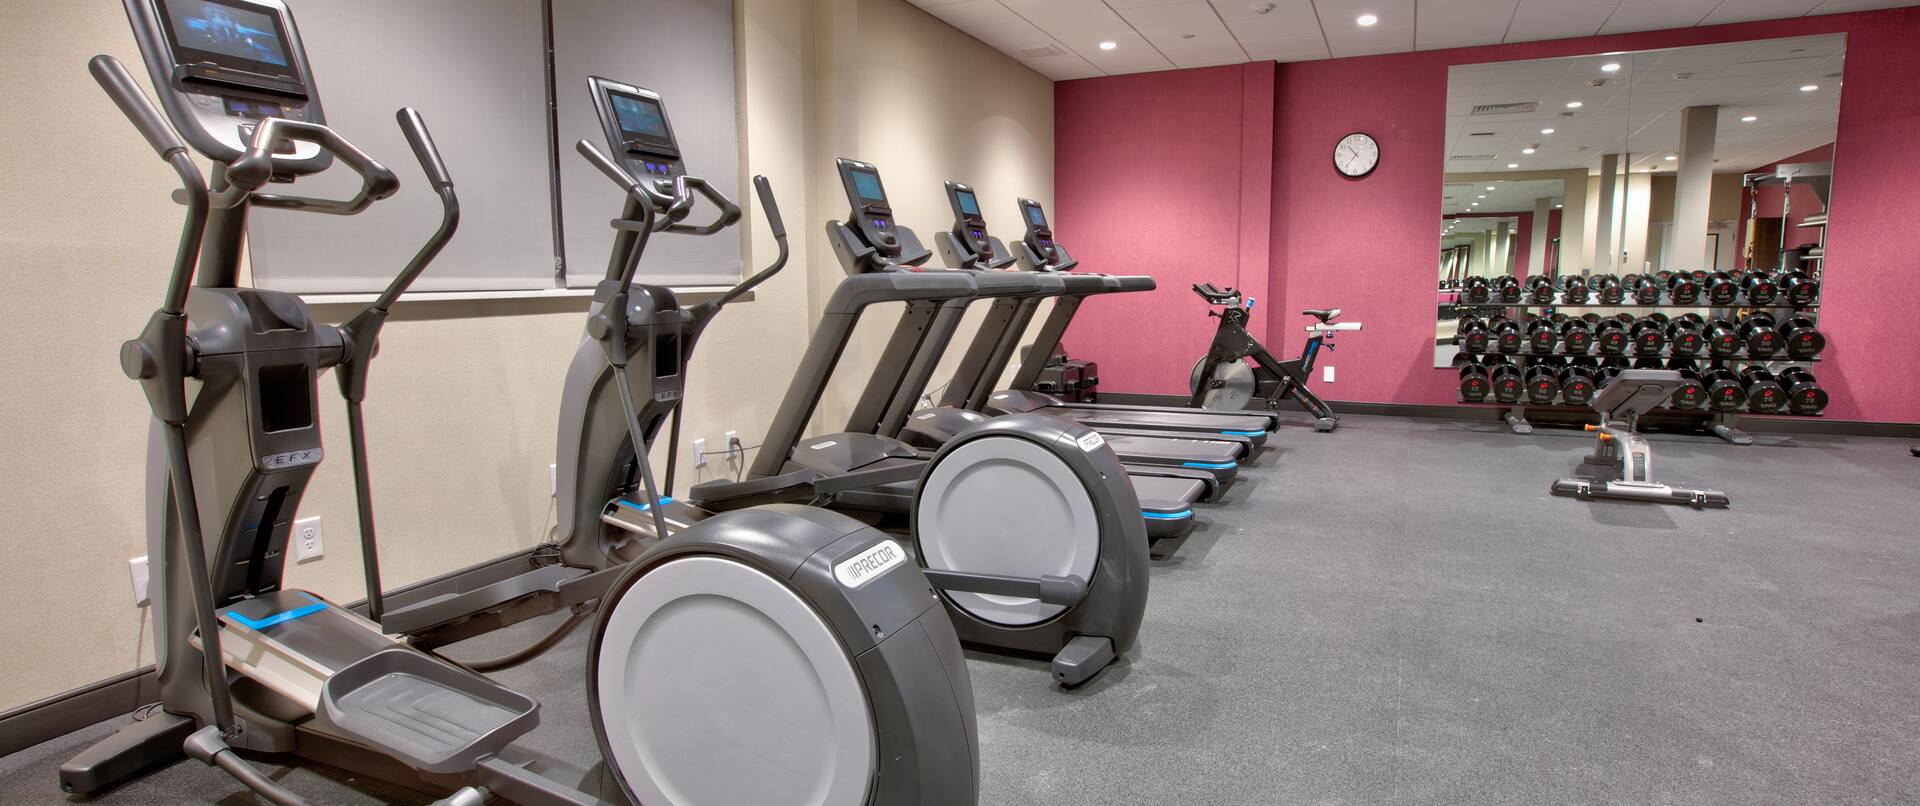 Fitness Center With Cardio Equipment 